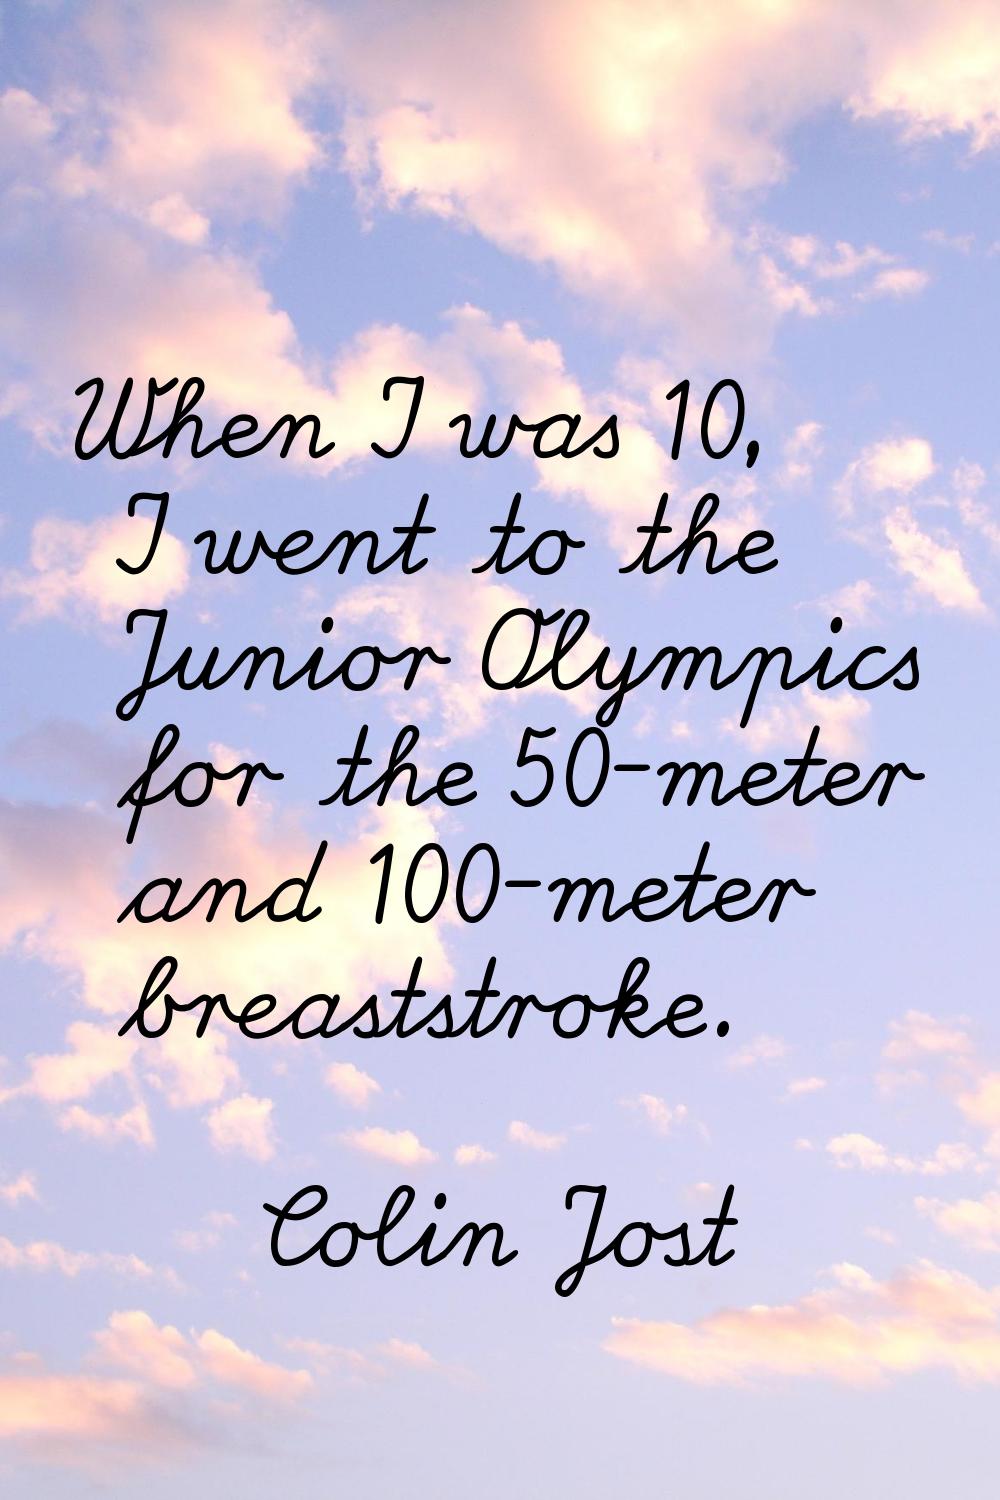 When I was 10, I went to the Junior Olympics for the 50-meter and 100-meter breaststroke.